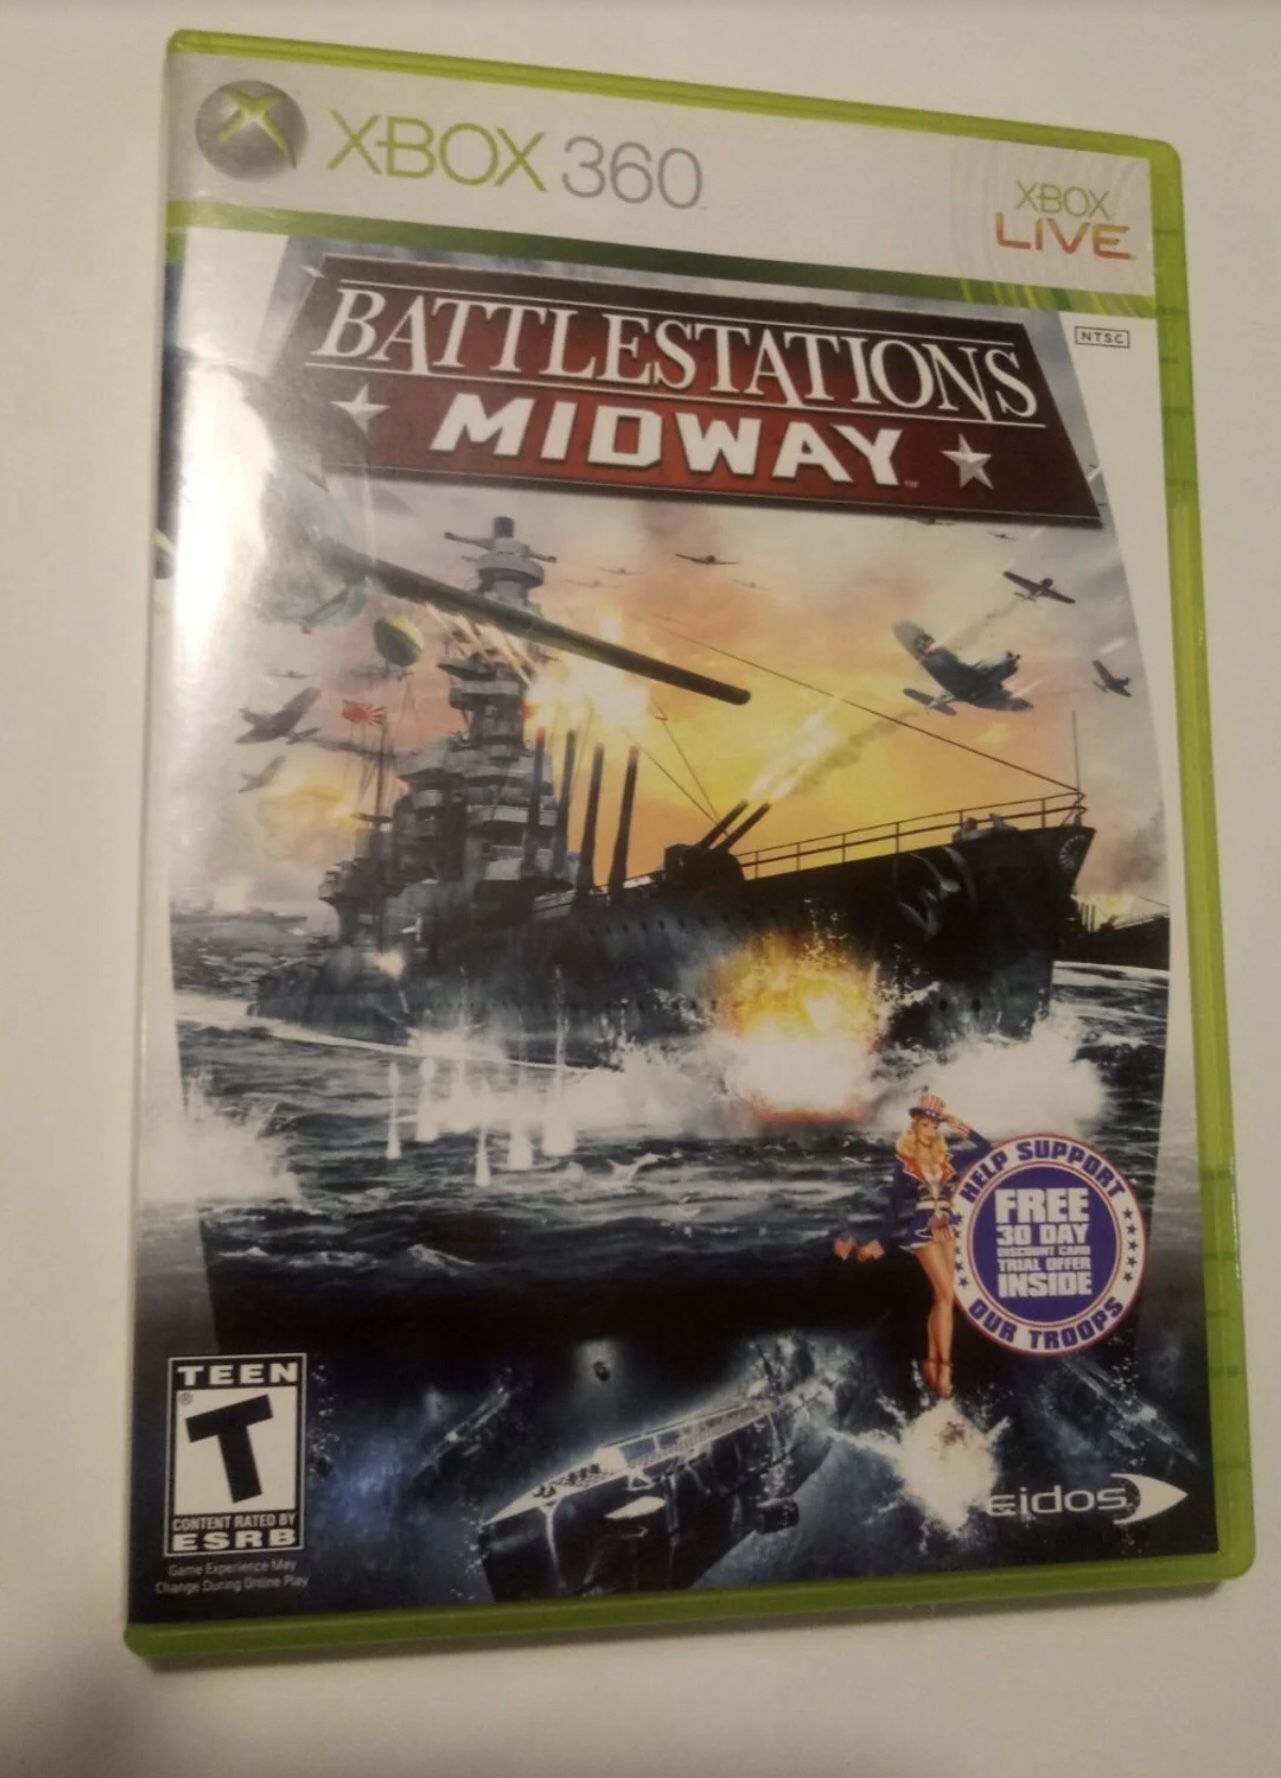 Battle stations midway Xbox 360 game